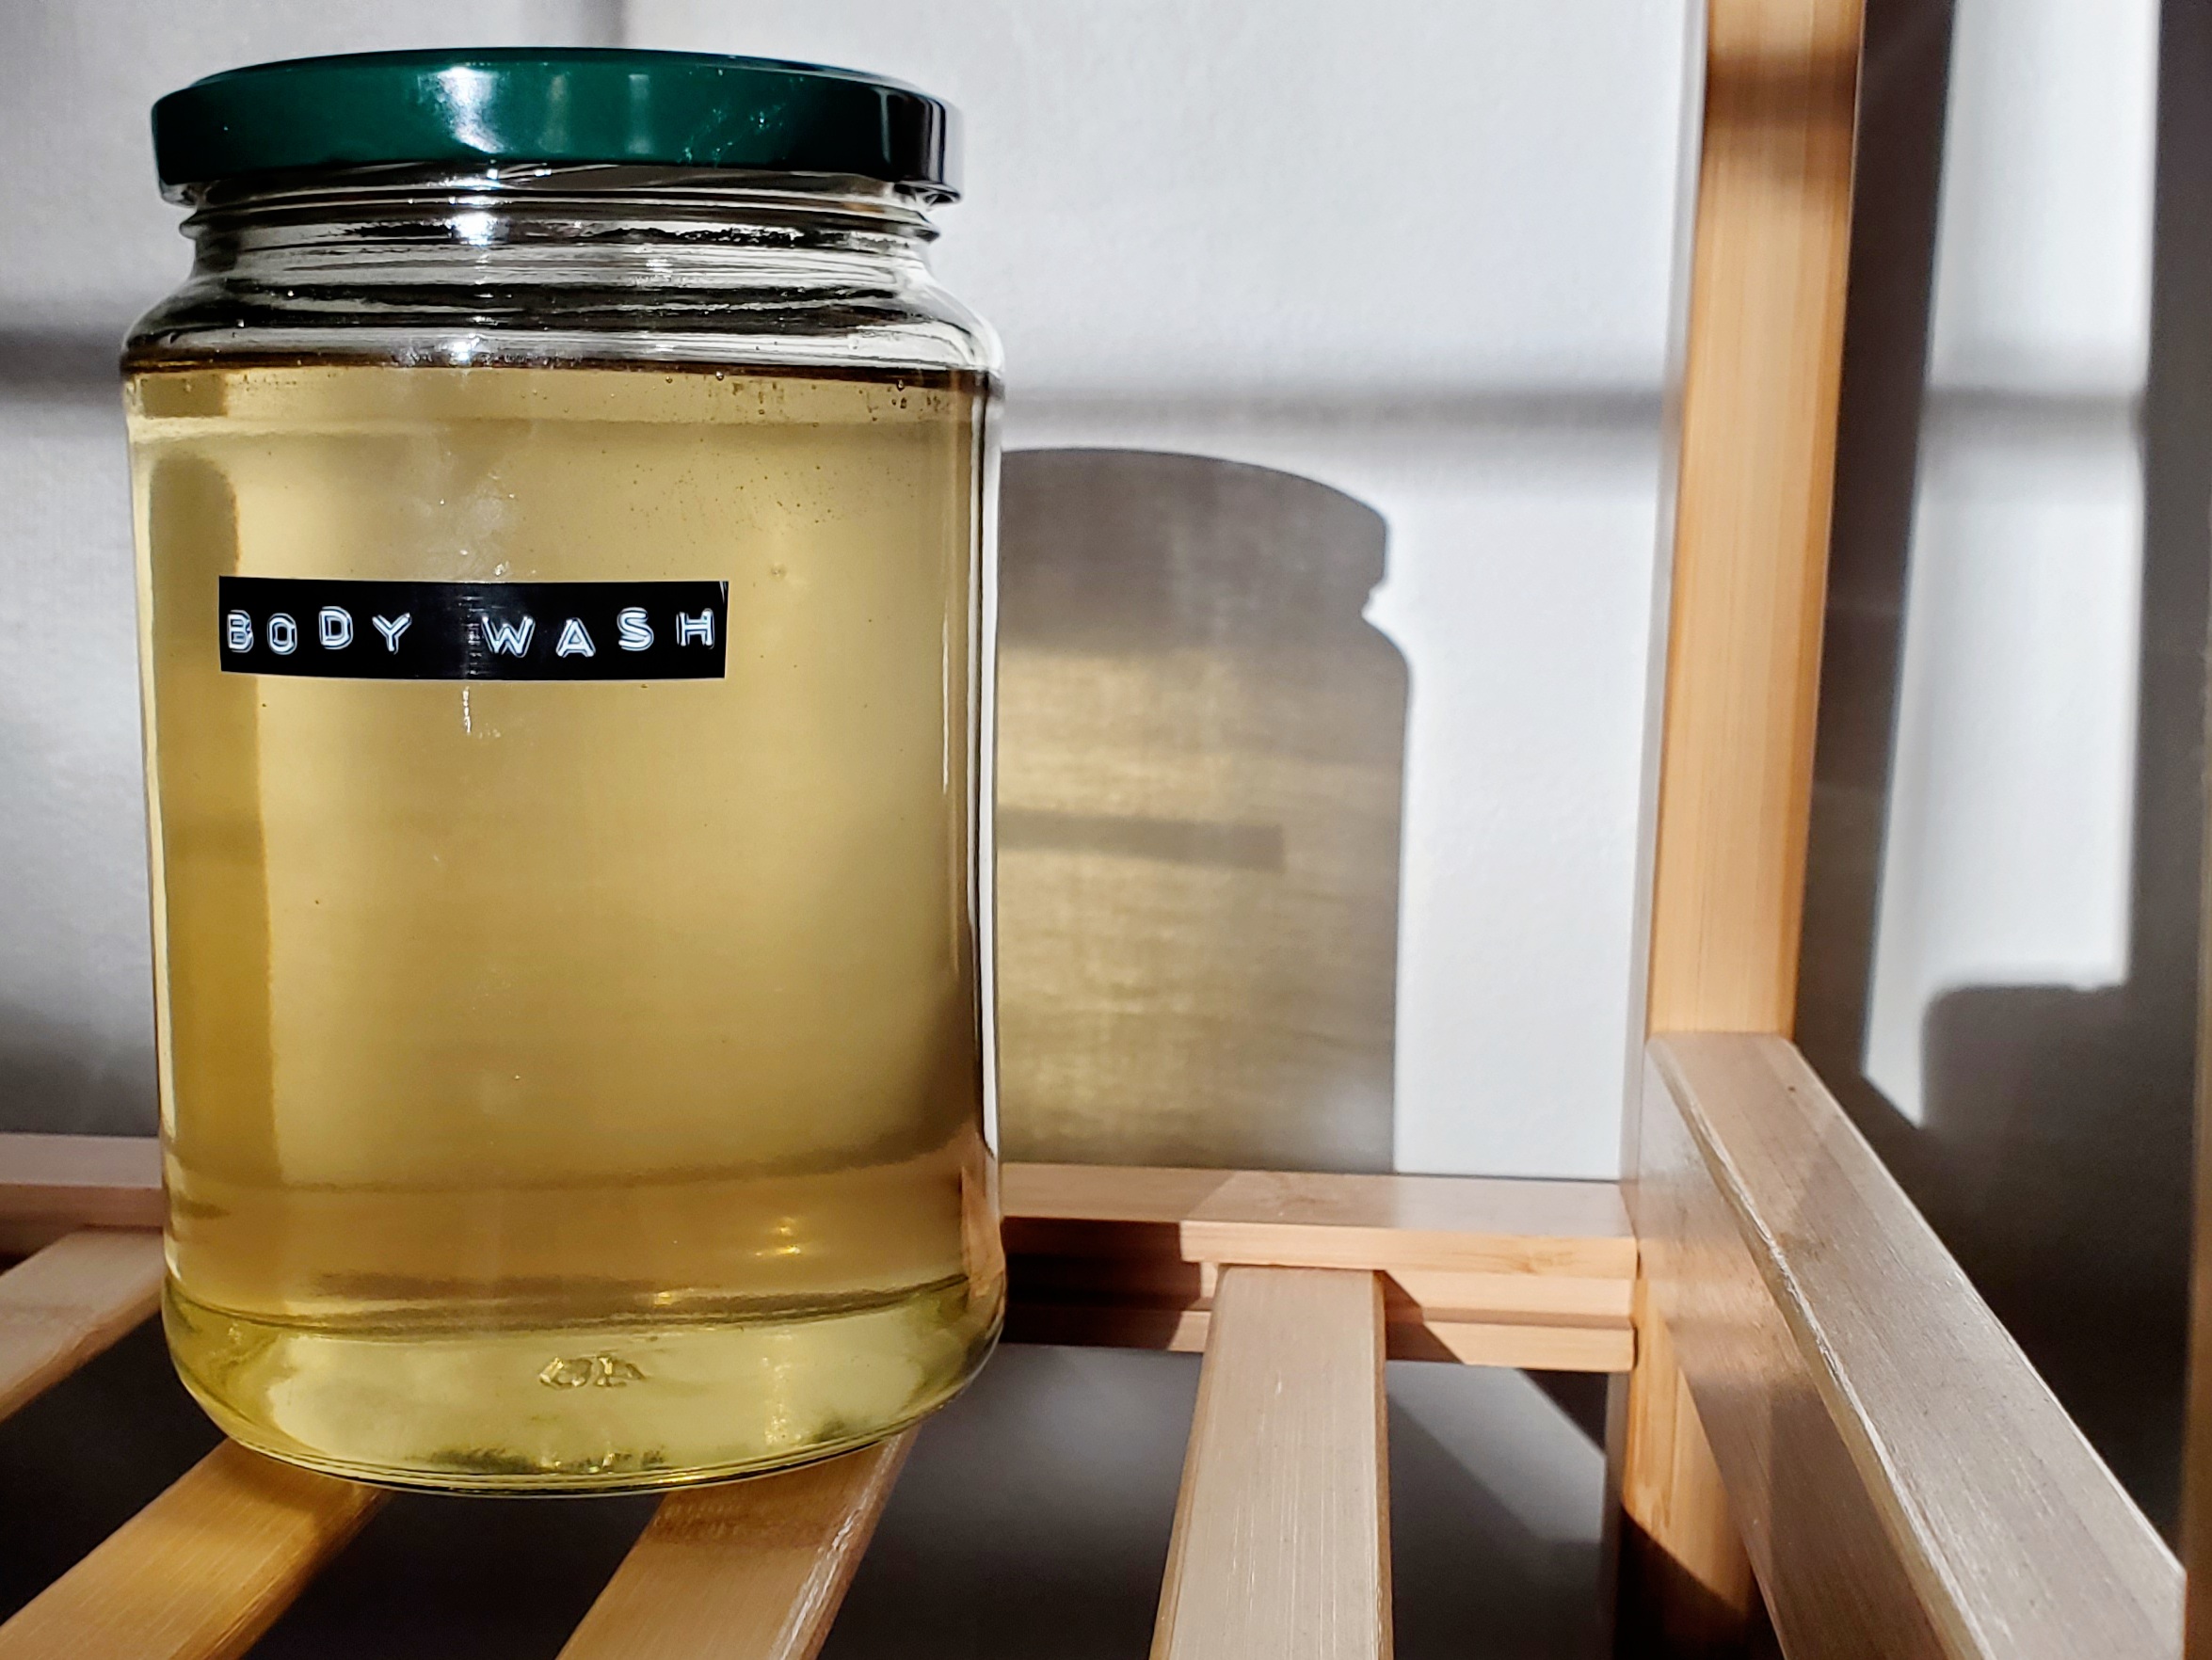 A large jar of pale yellow body wash with a green lid sits on a wooden rack. The sunlight is casting lots of shadows. The jar reads "body wash"